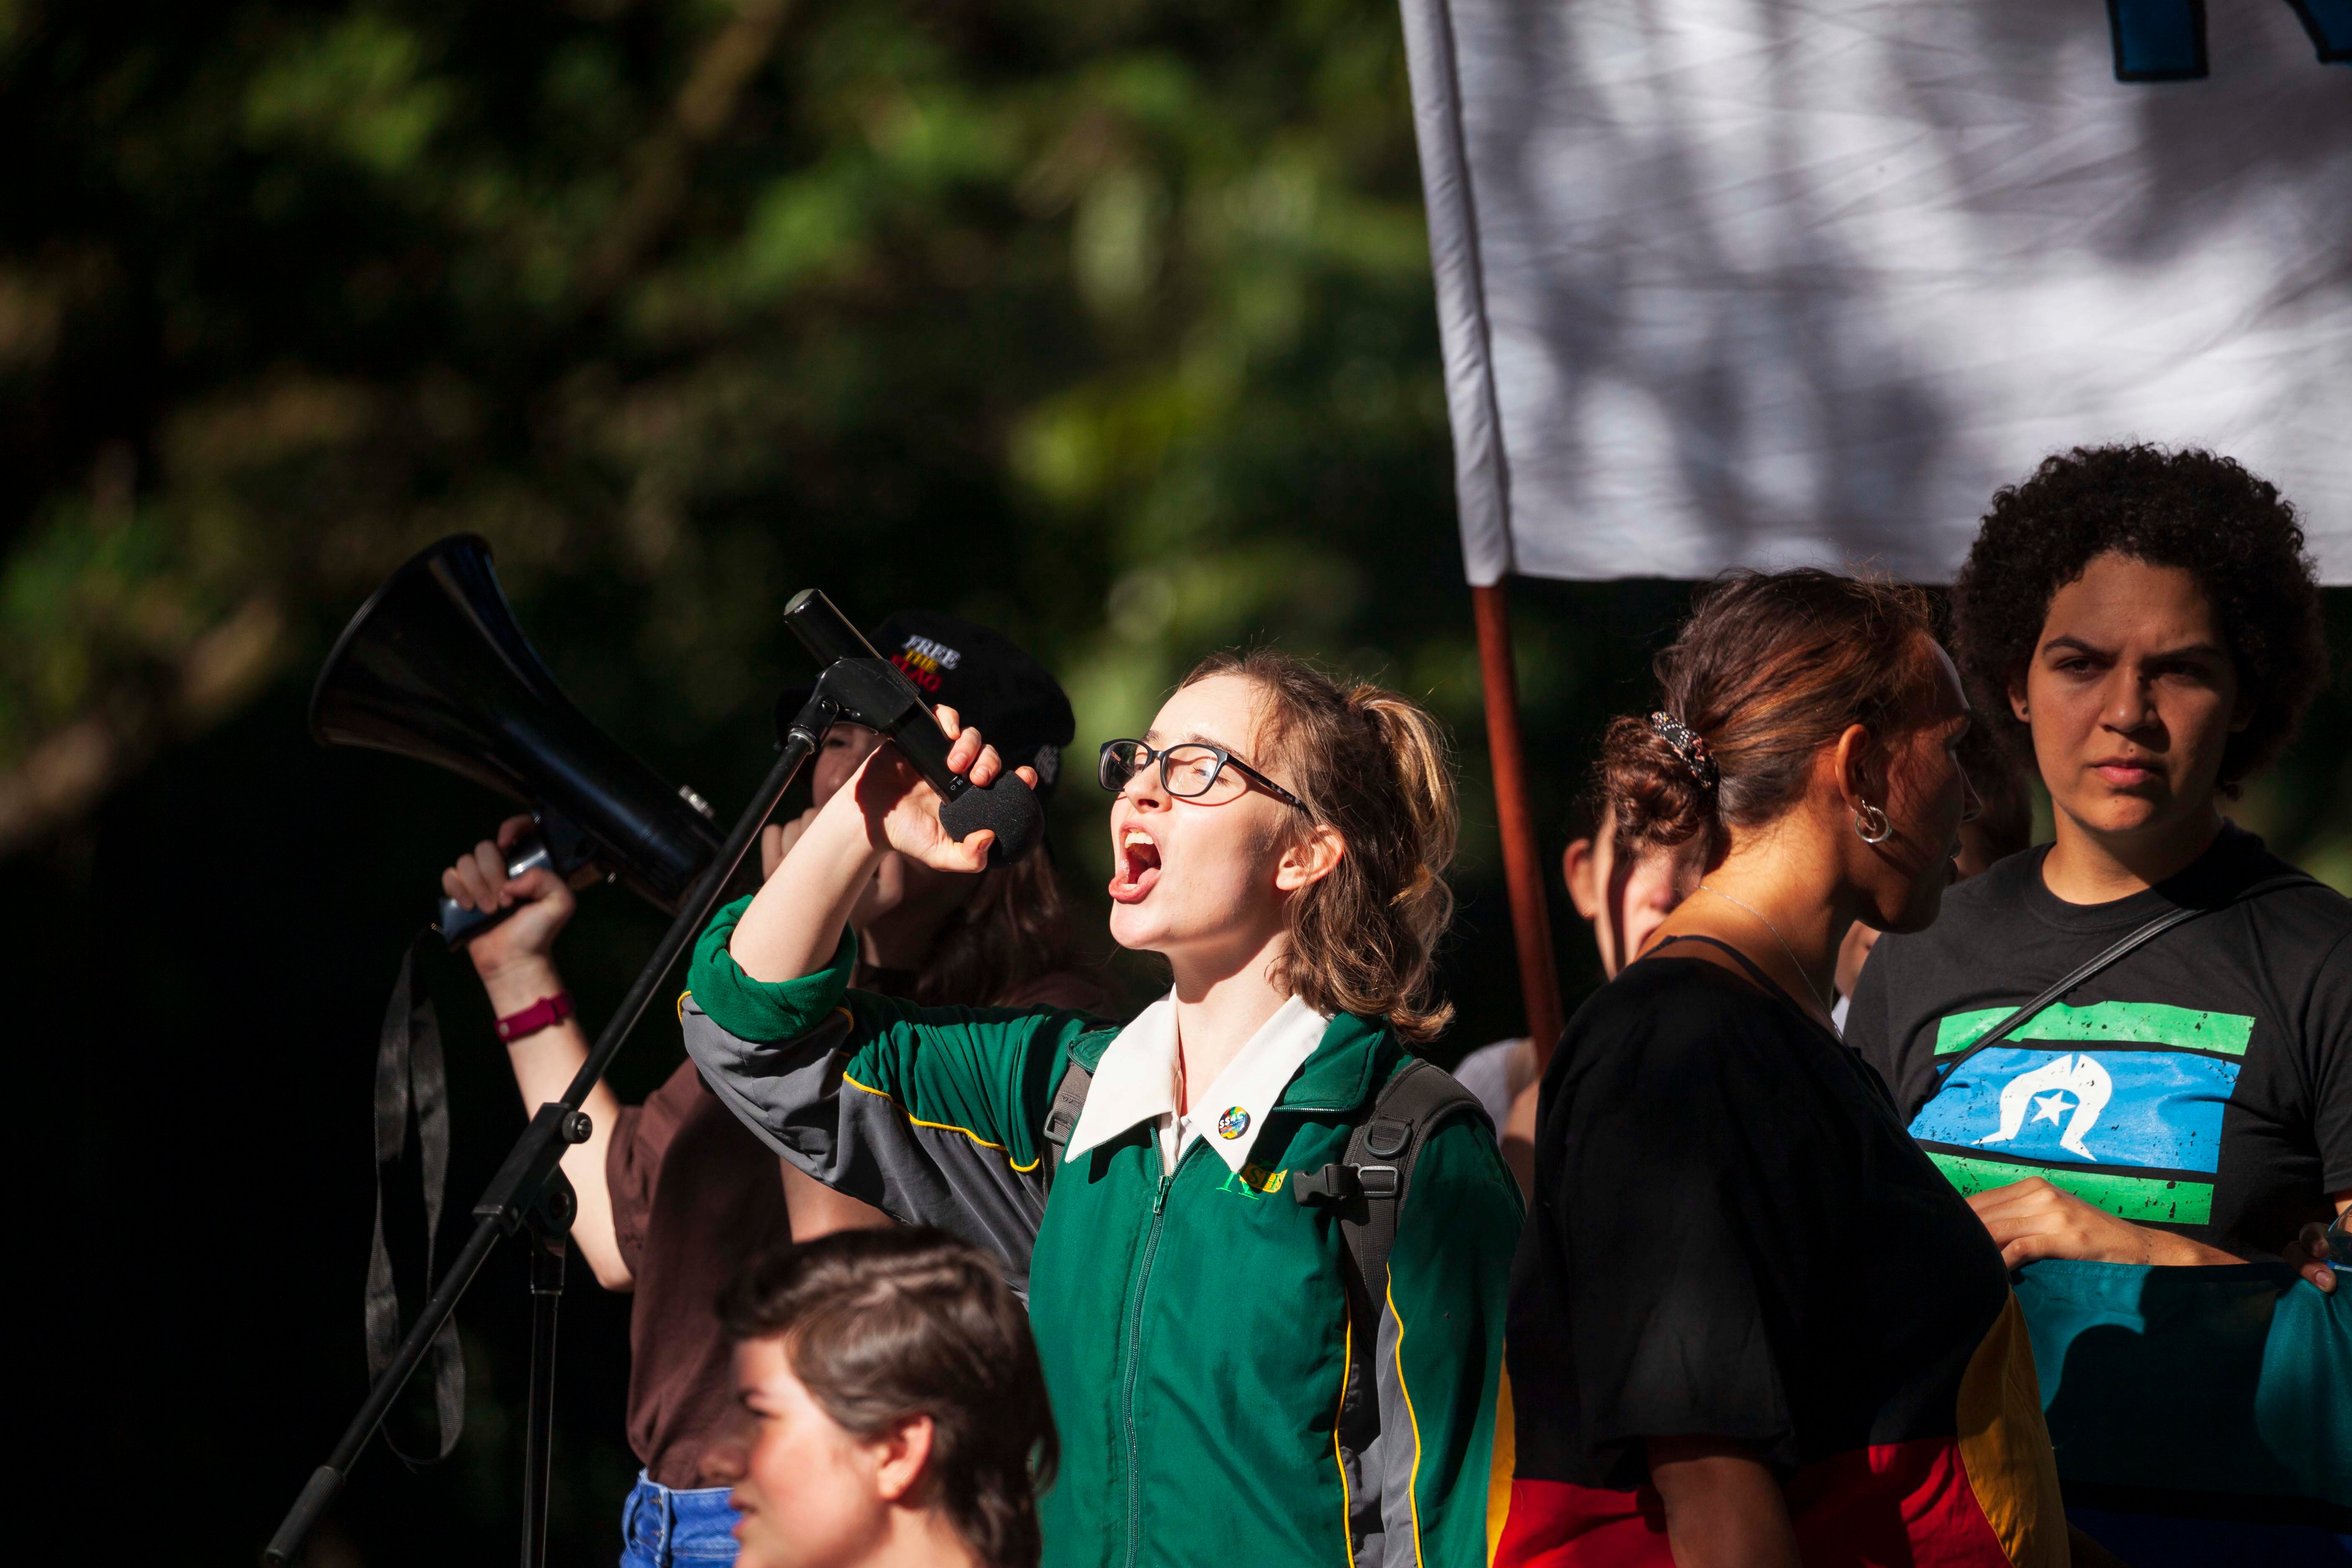 A student protester speaks to the crowd during a climate change protest in Brisbane.